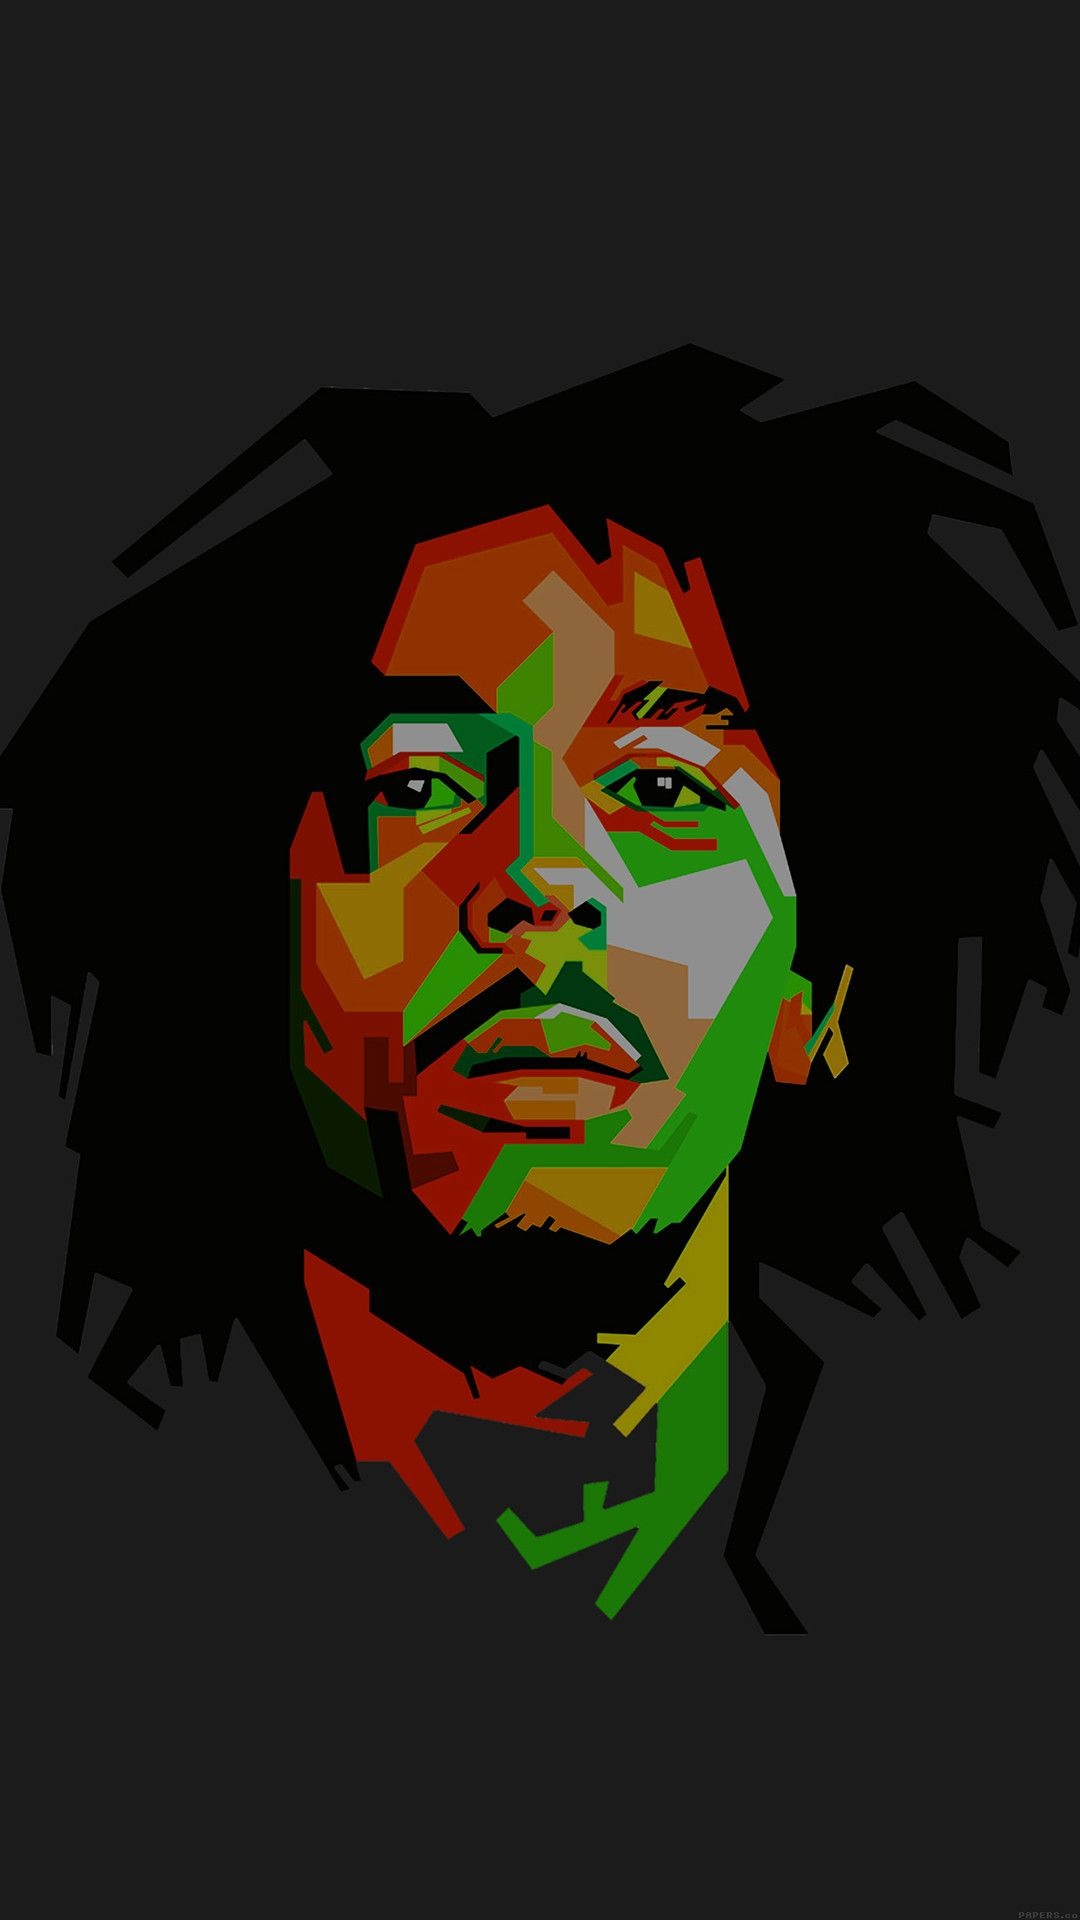 Bob Marley: ‘One Love’, voted the best song of the 20th century. 1080x1920 Full HD Wallpaper.